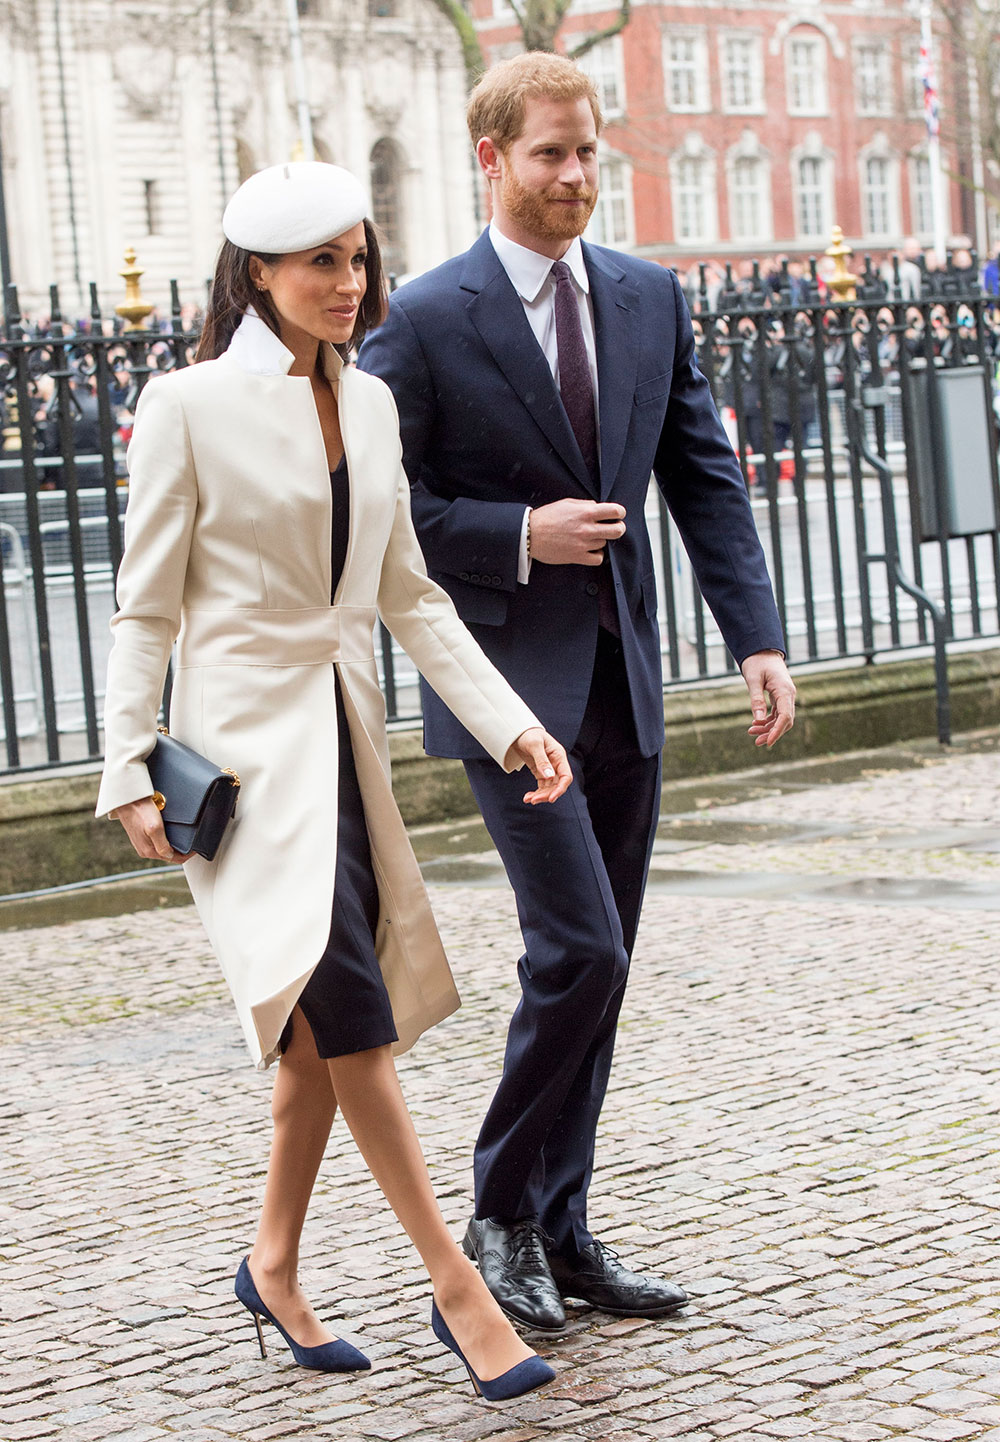 Prince Harry and Meghan Markle at the annual Commonwealth Day celebrations in Westminster Abbey, England.